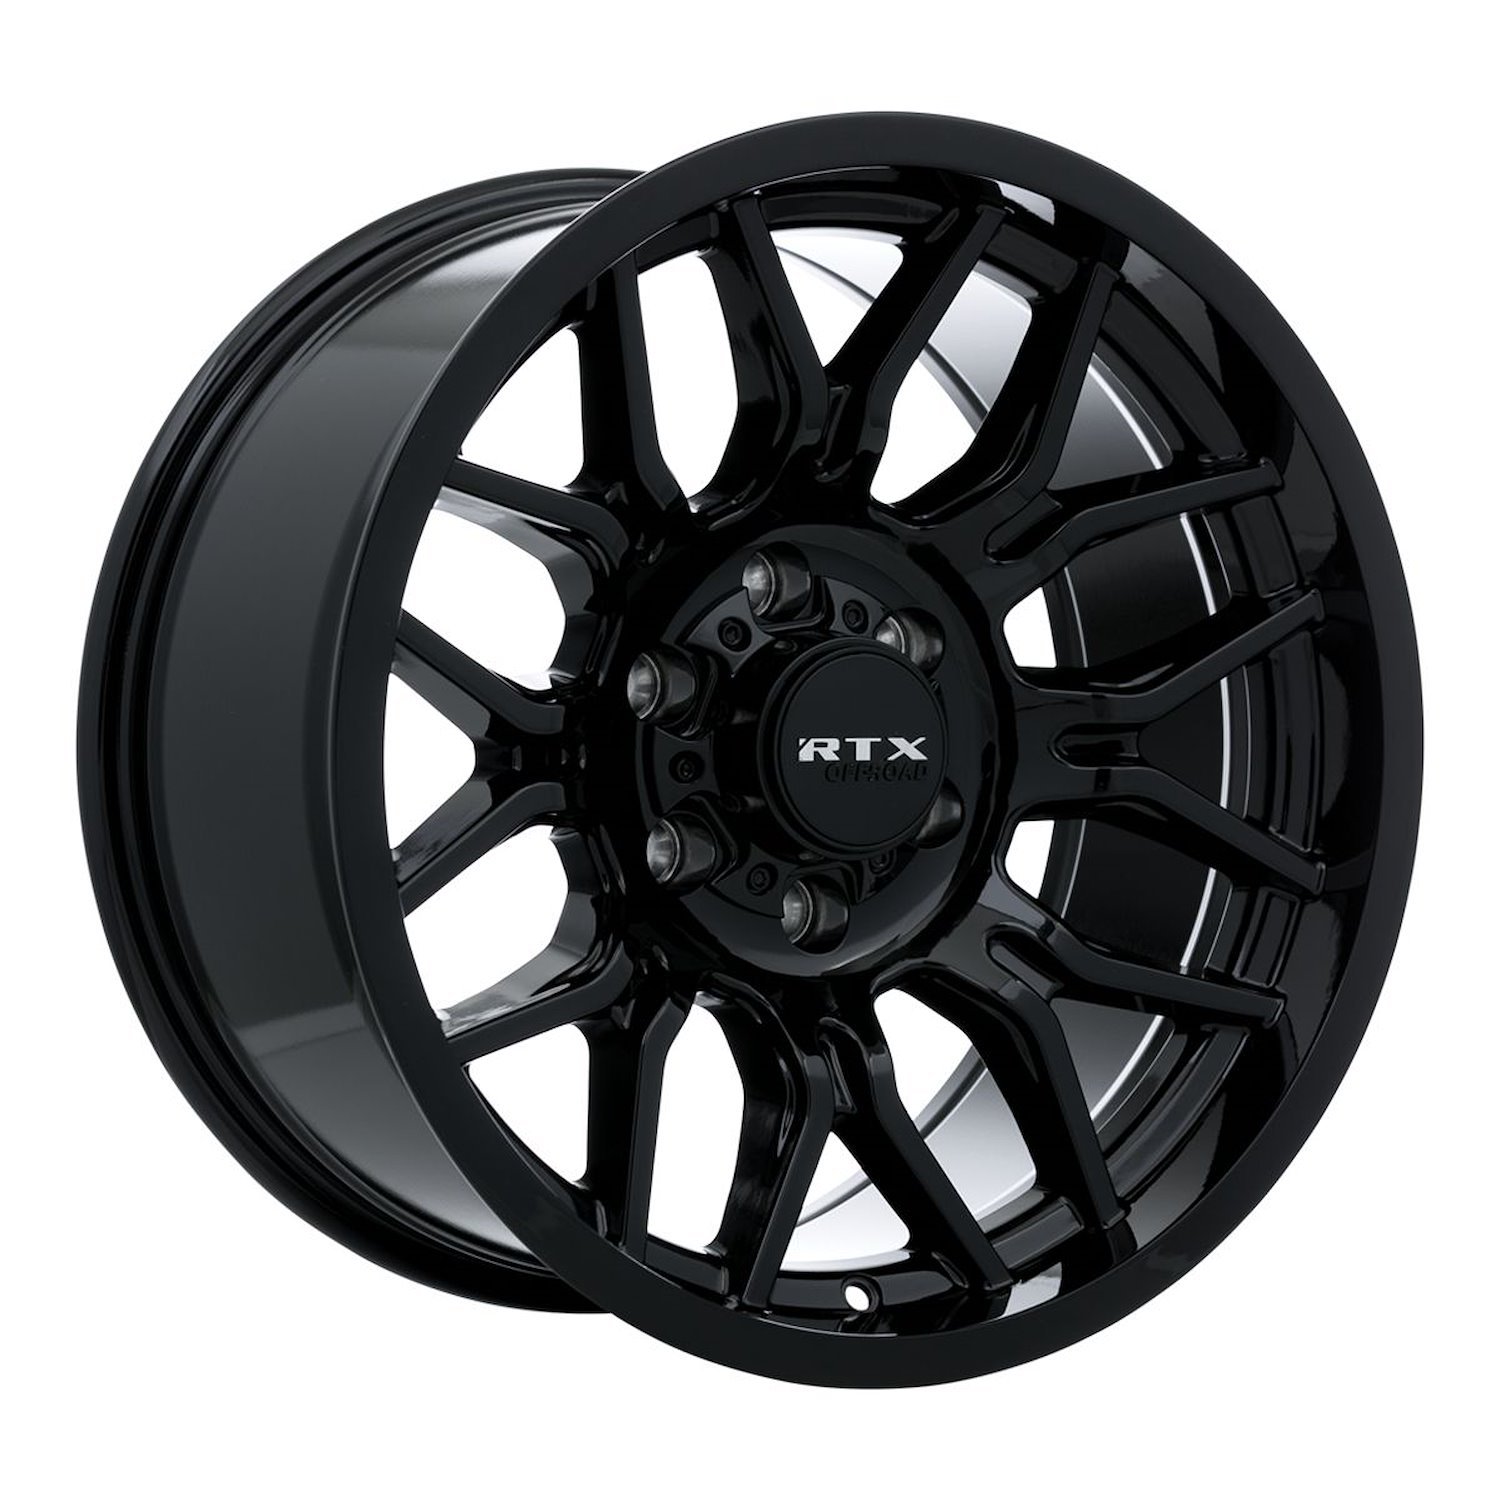 163752 Off-Road Series Claw Wheel [Size: 18" x 9"] Gloss Black Finish